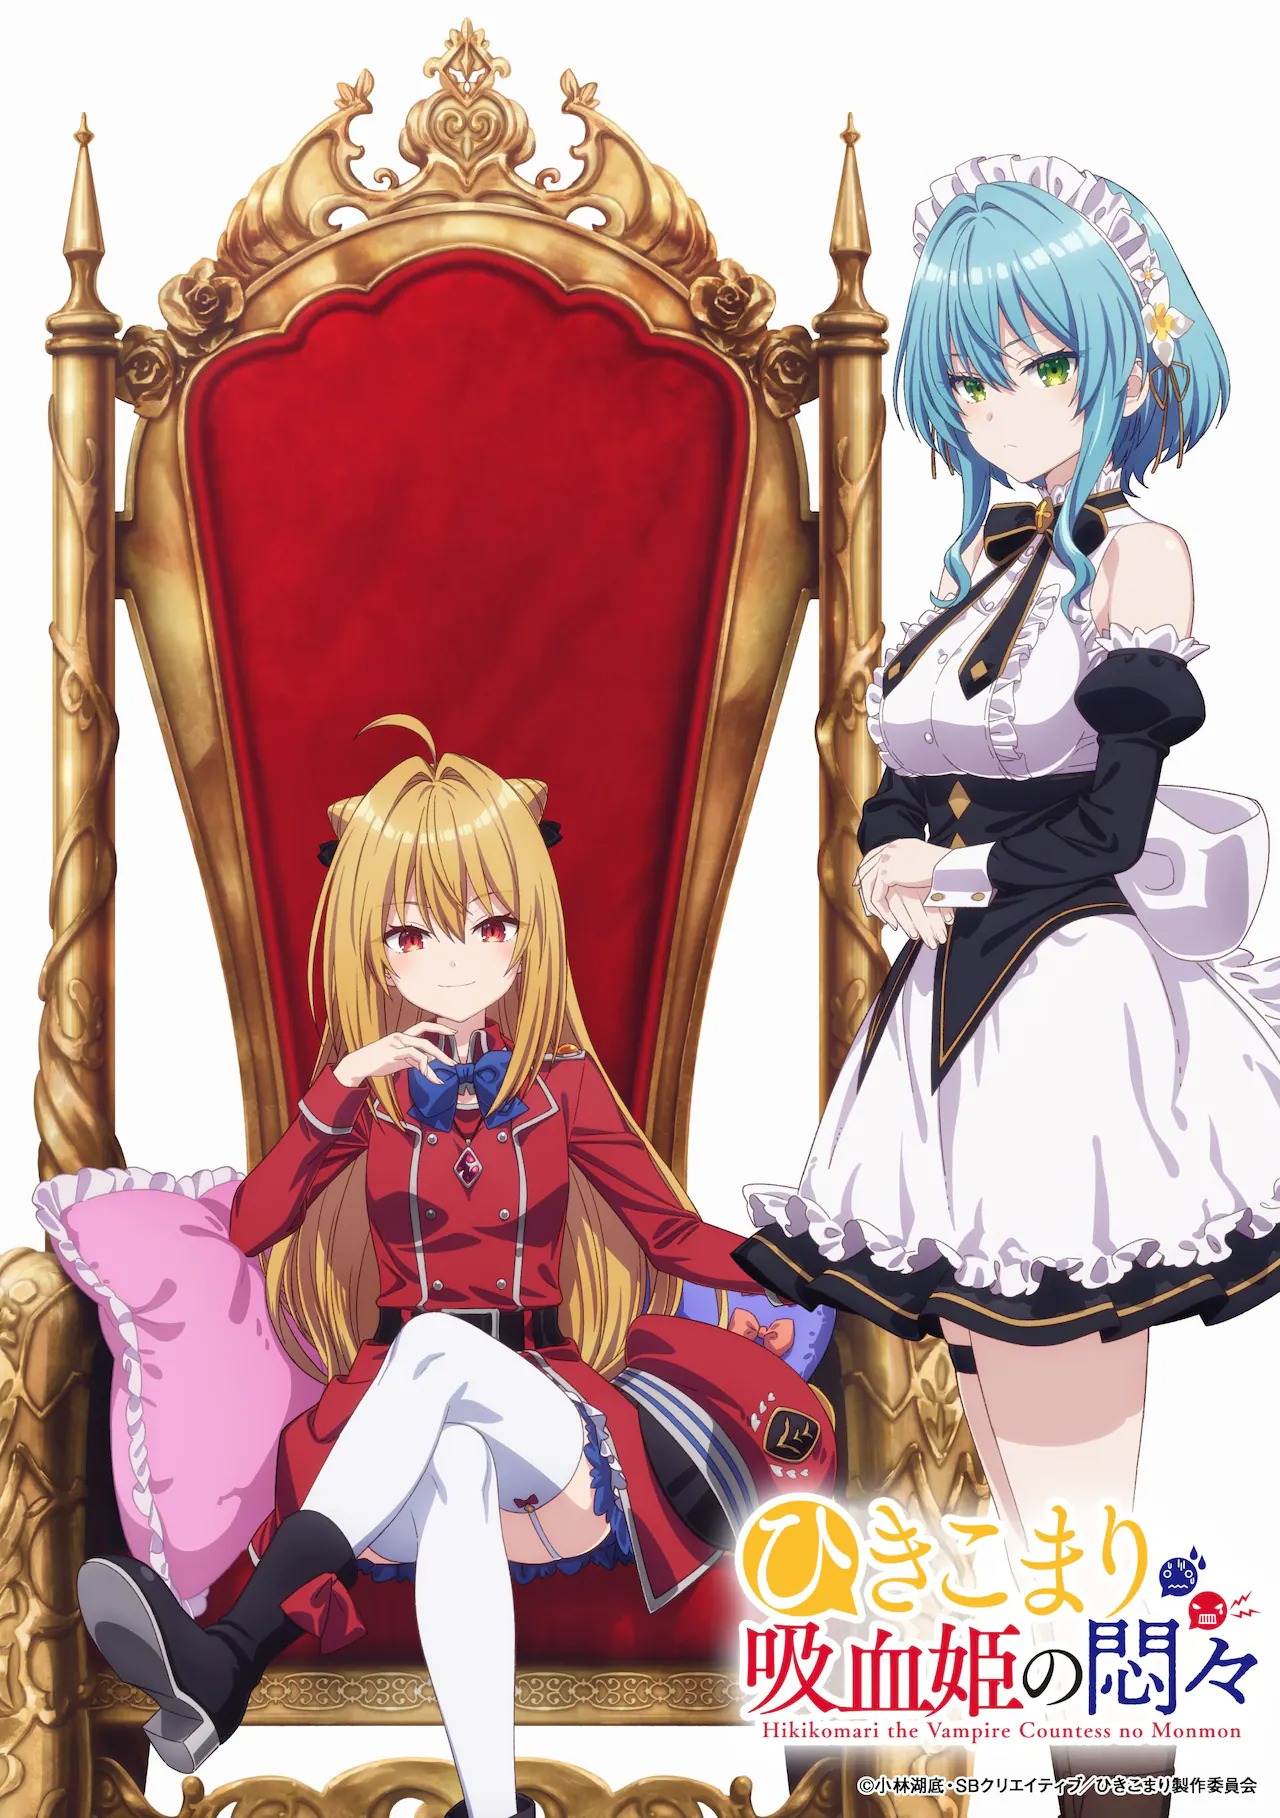 A key visual for the upcoming The Vexations of a Shut-In Vampire Princess TV anime featuring the main character, Terakomari Gandesblood, seated on an elaborate royal throne while her maid Villhaze stands attendant nearby.